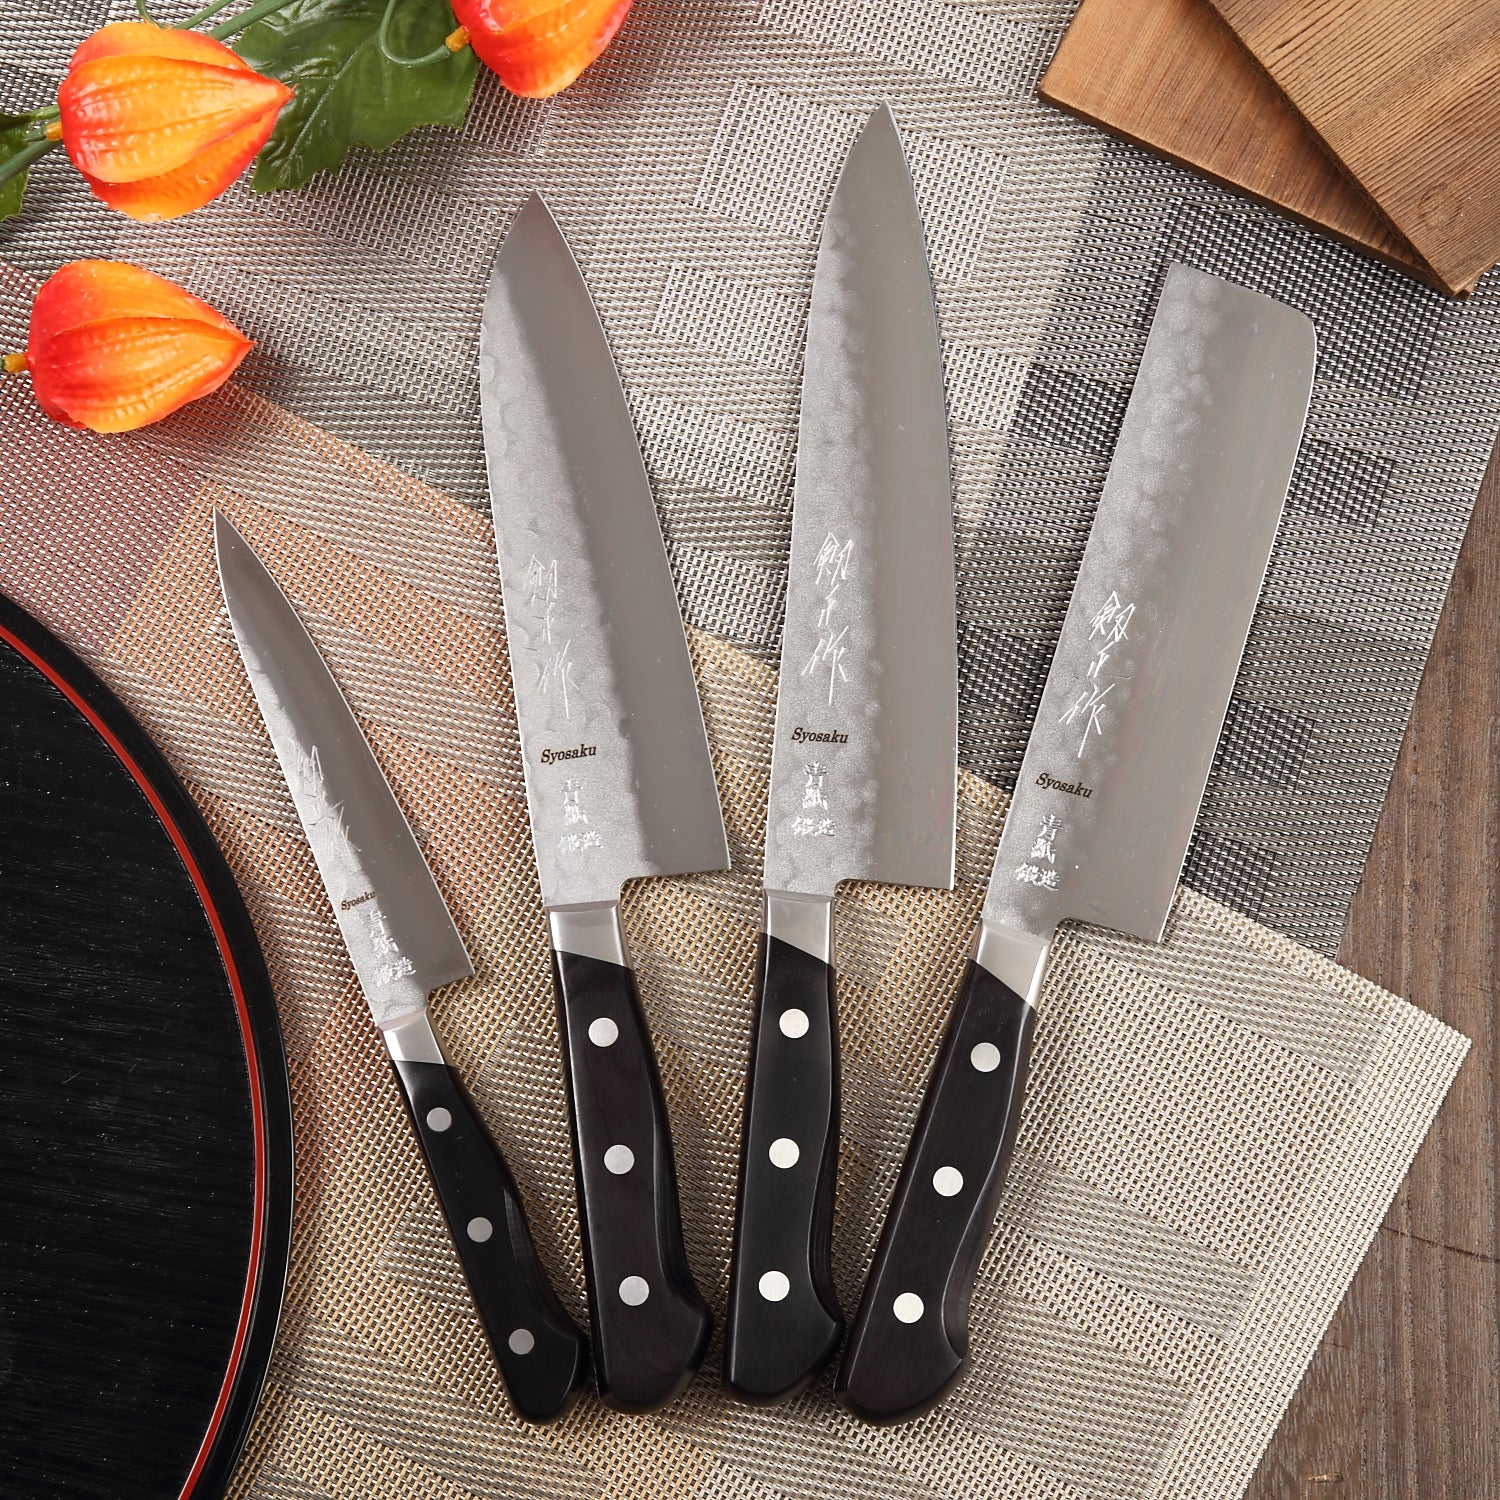 EaZy MealZ 2-Piece Knife Set 7-inch Santoku Knife and 4-inch Chef's Knife,  Super Sharp Stainless Steel 